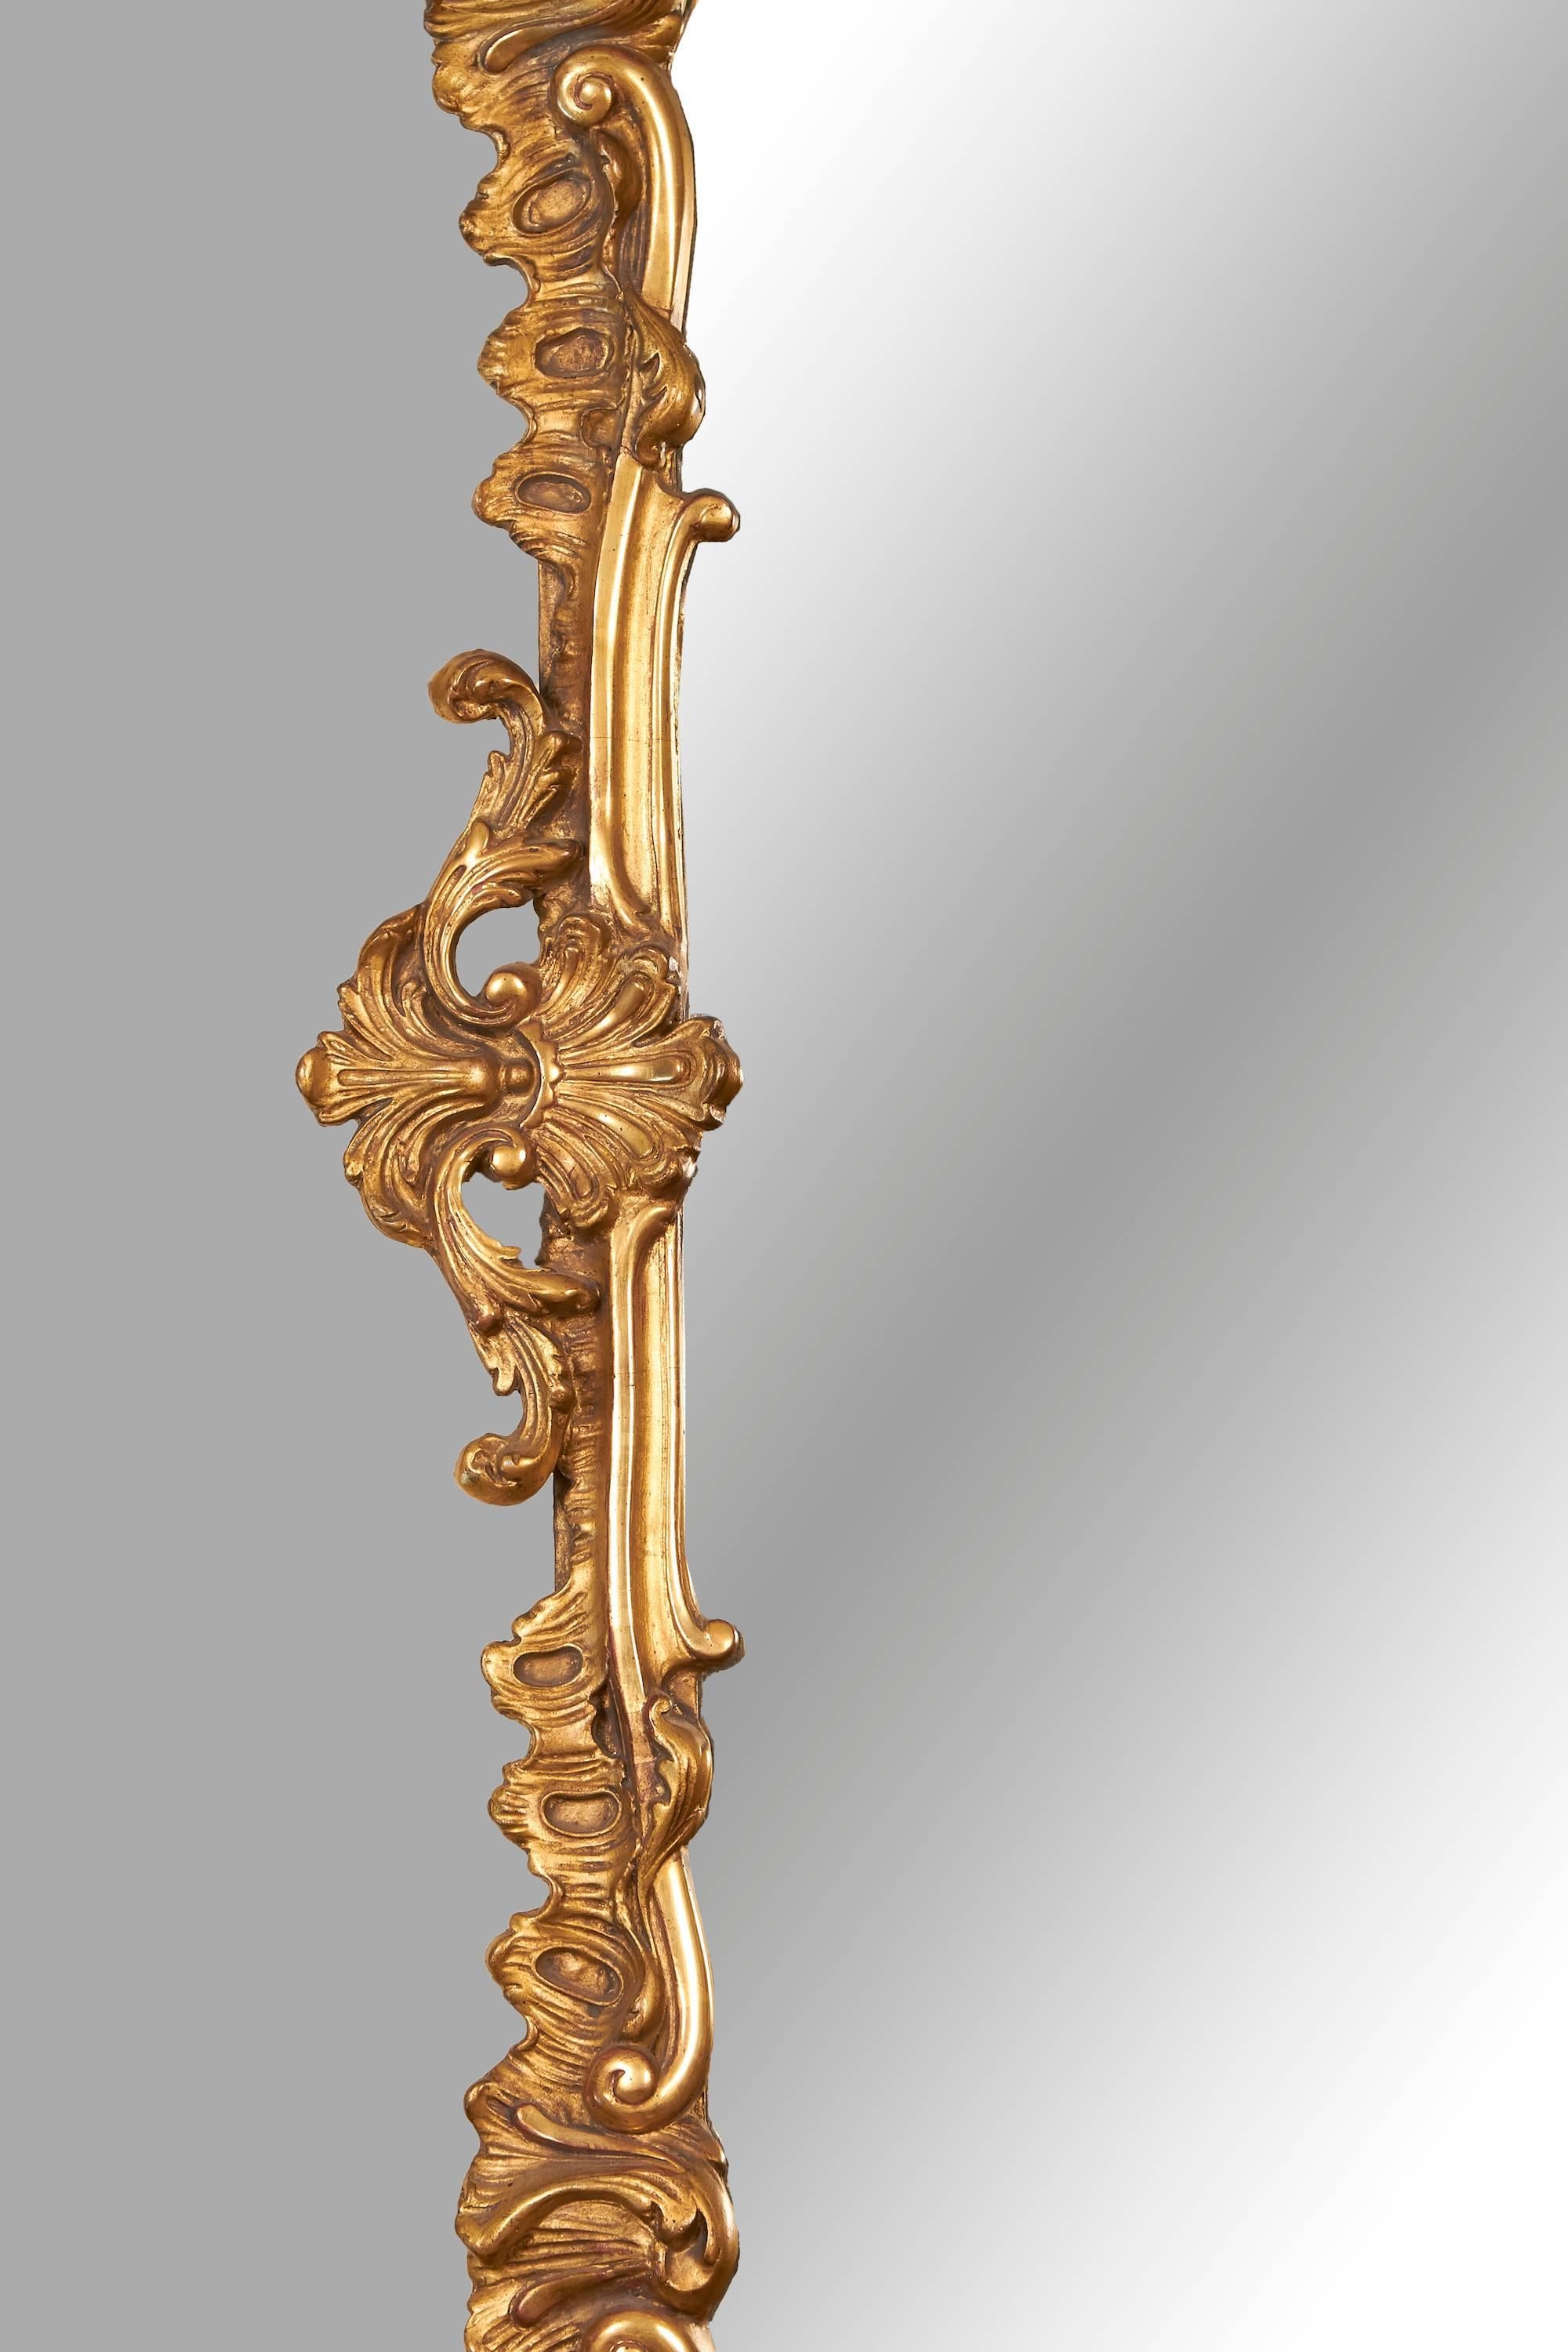 A Louis XV style giltwood and gilt composition mirror with overall foliate decoration, the lower corners decorated with shell motifs, the mirror plate apparently original, circa 1880.